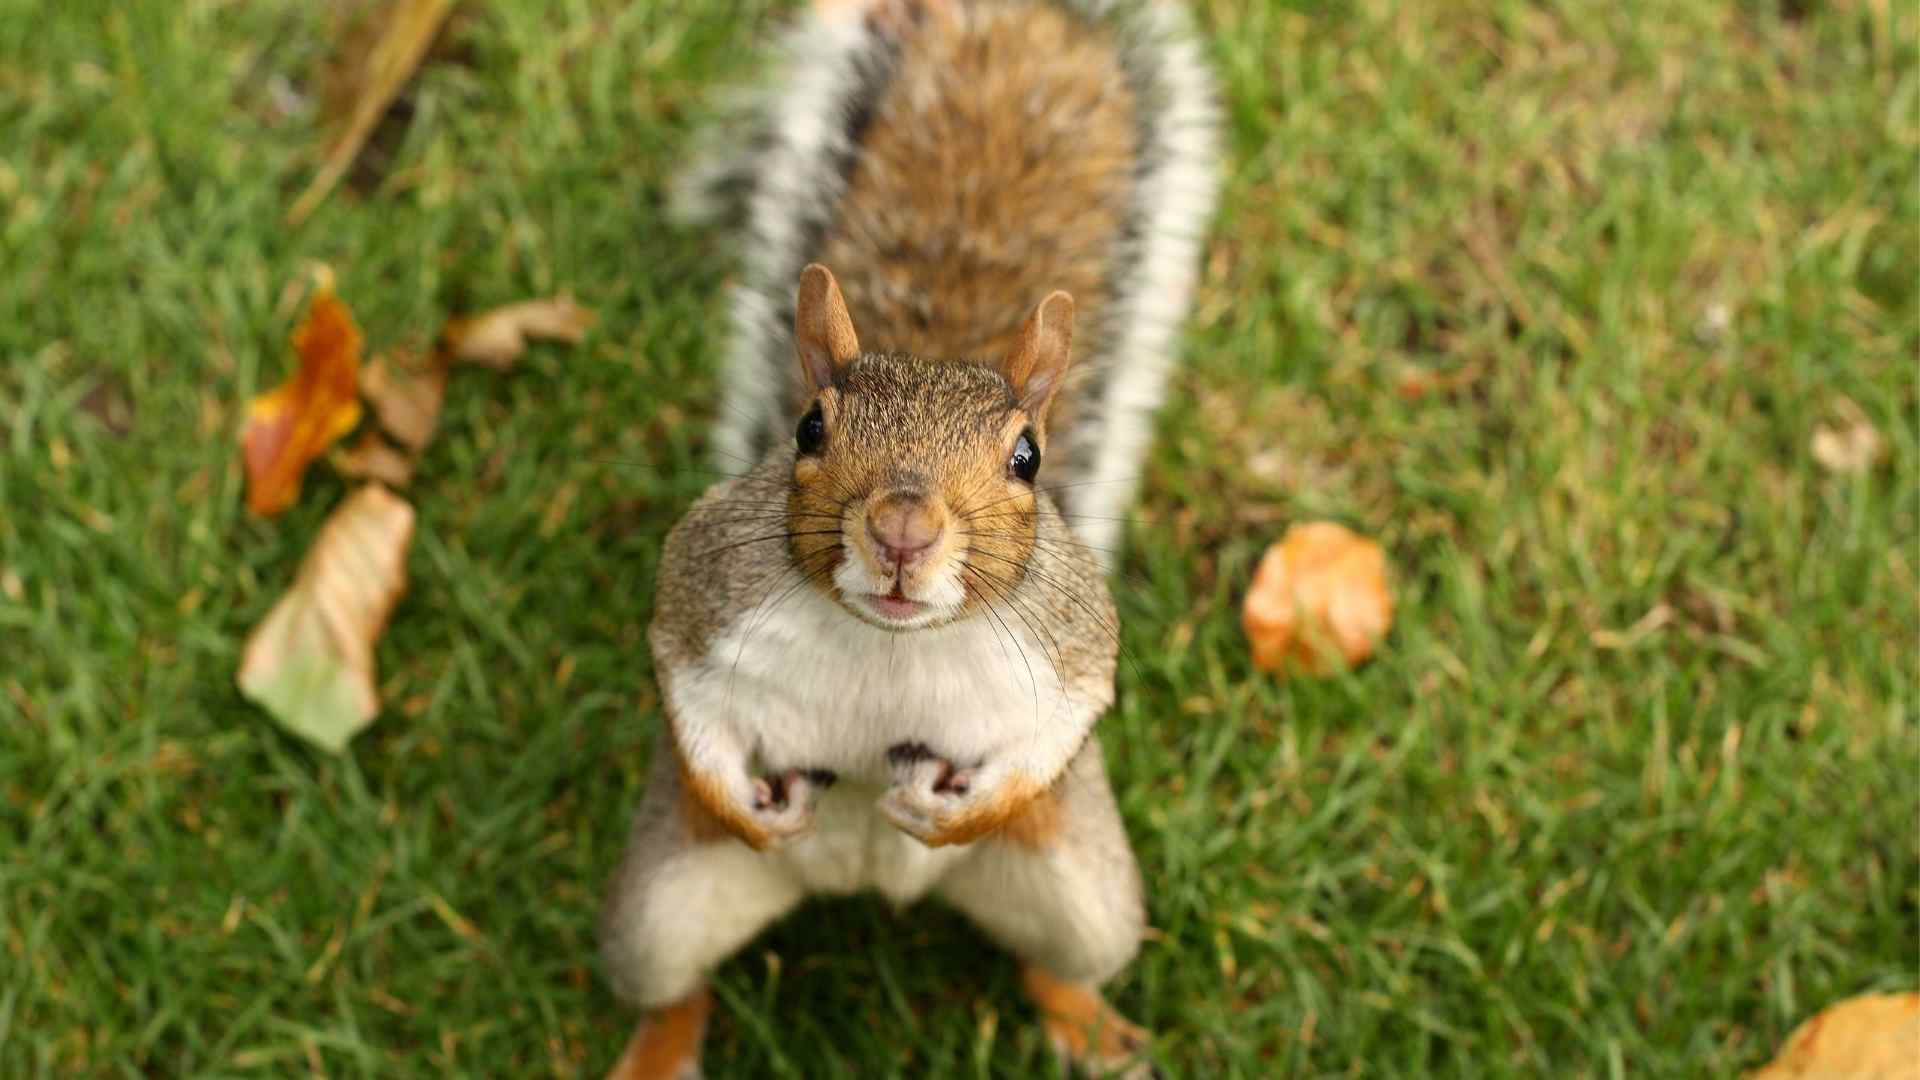 How To Keep Squirrels Out Of Your Yard - 7 Ways